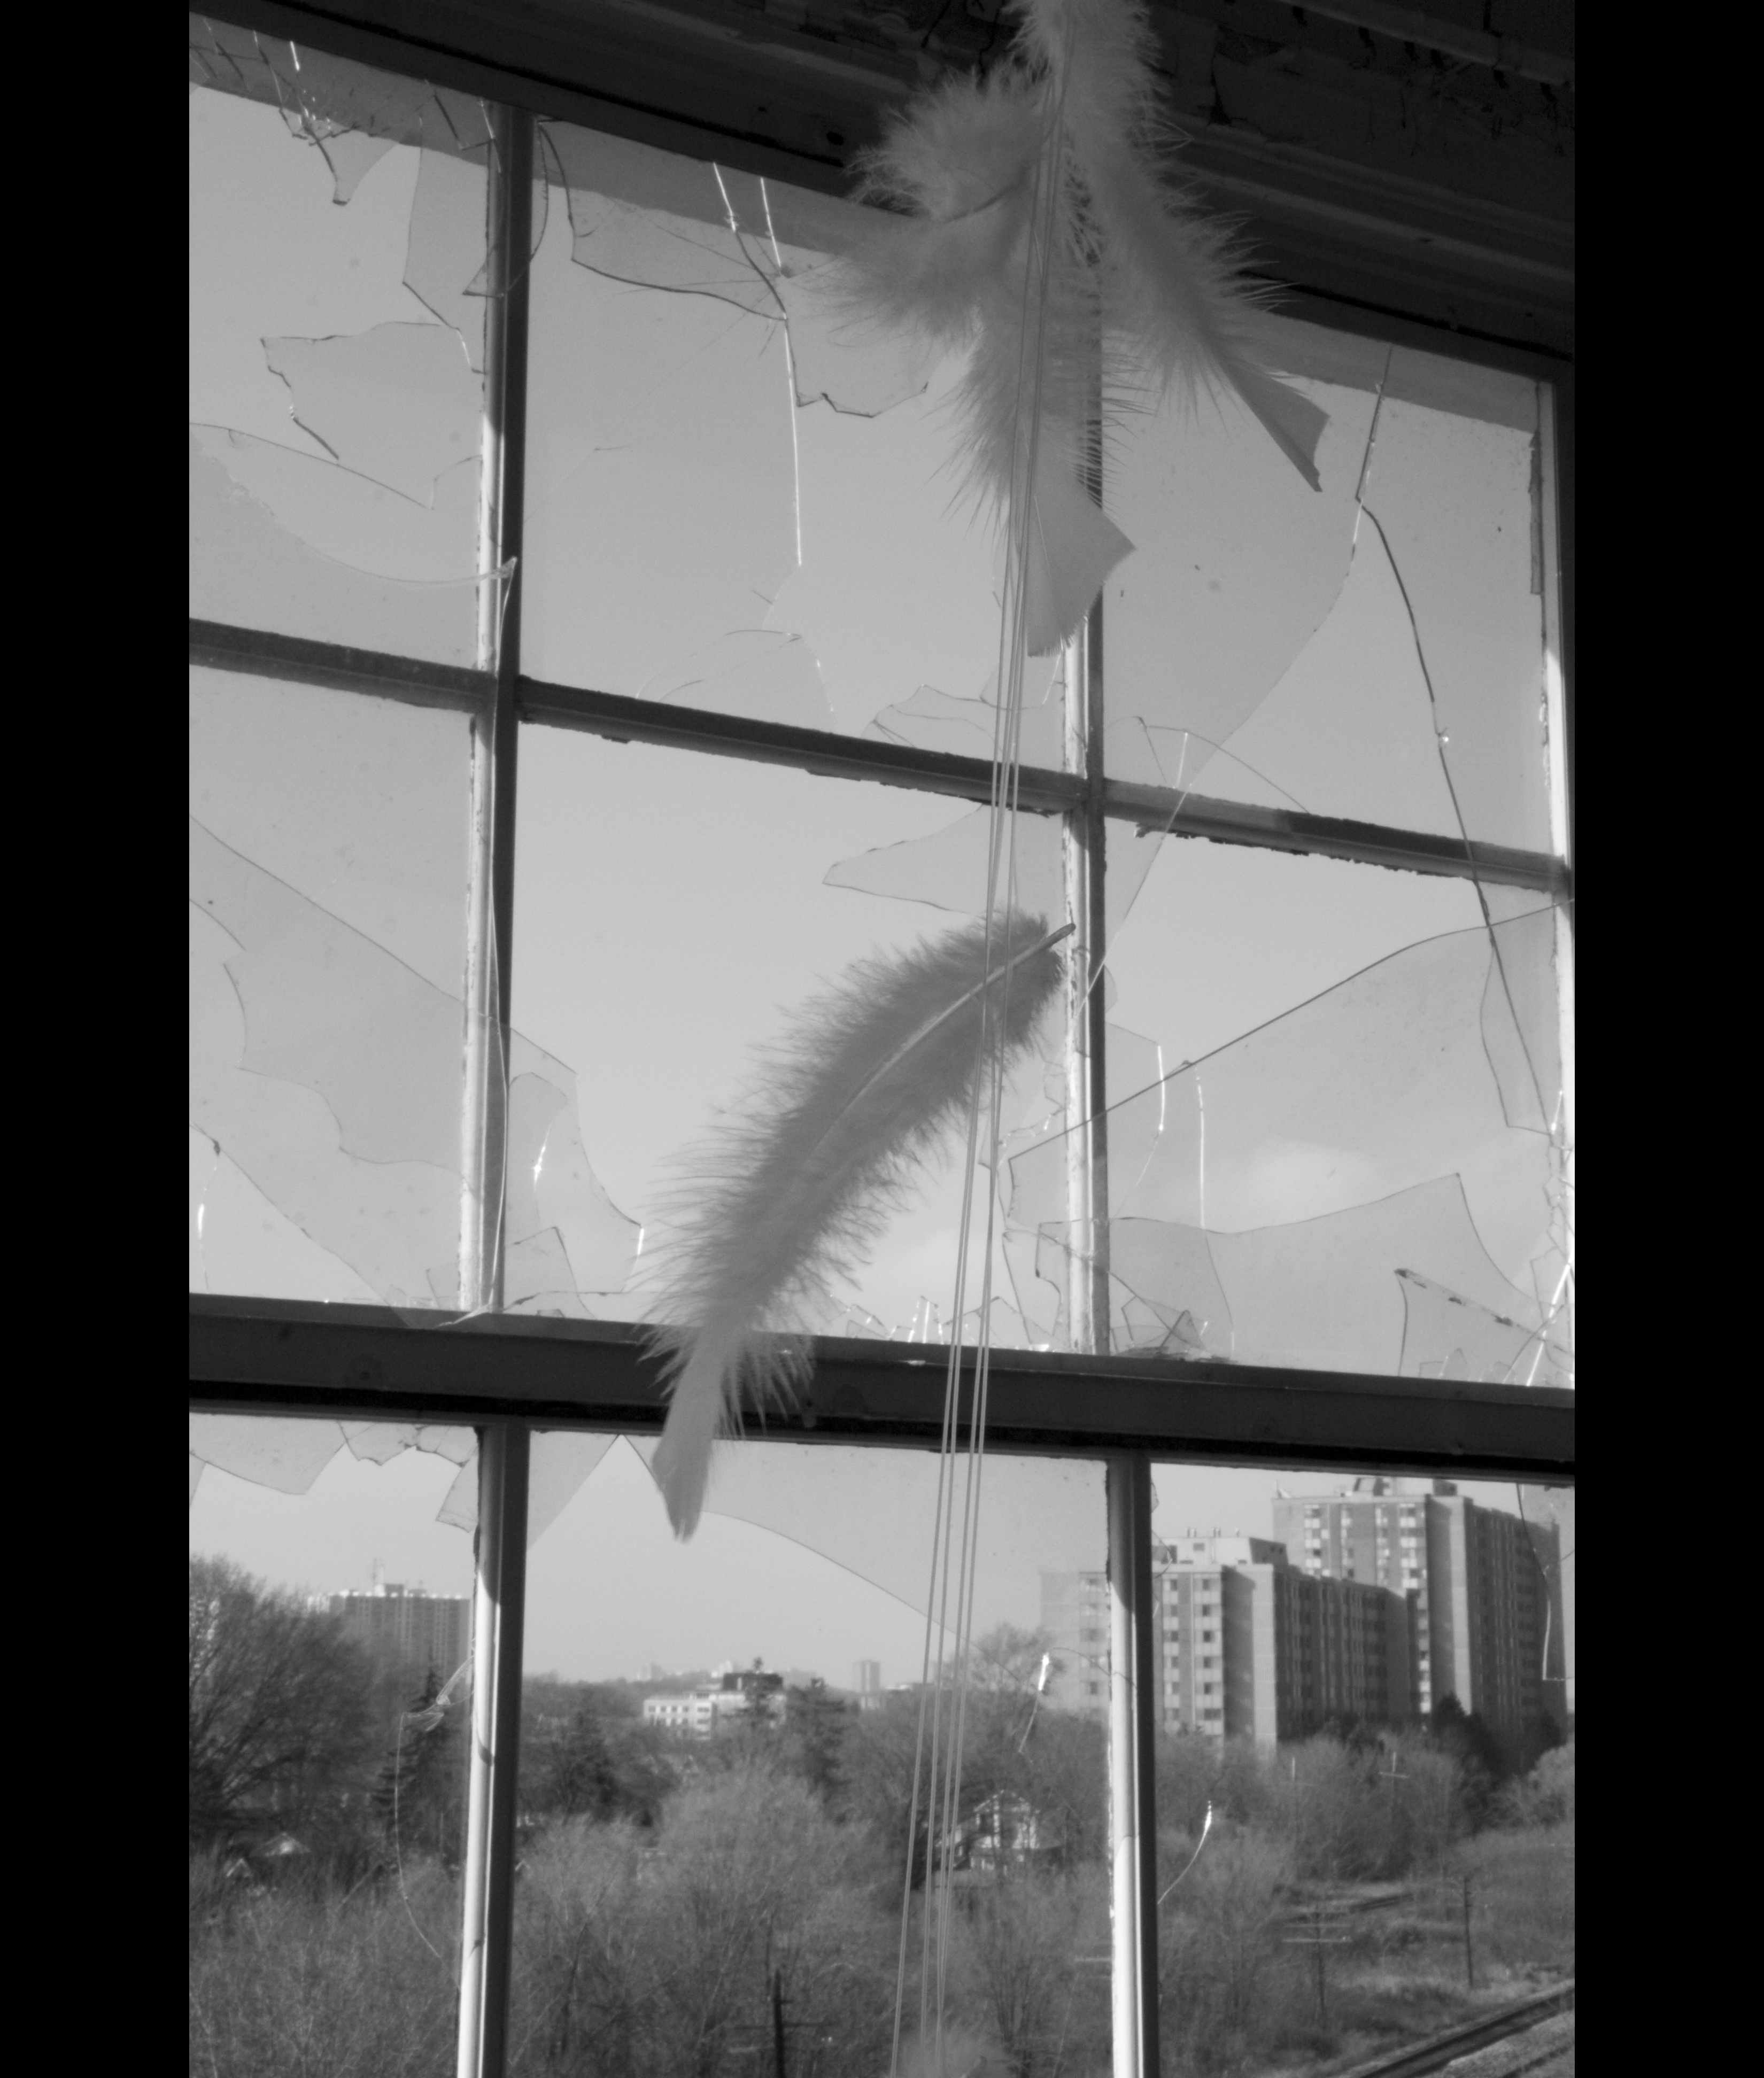 FEATHER - walking through the empty corridors, littered with debris...turning corners and finding empty rooms or locked doors or broken shelving...It was like walking through a dream. You don't know where you're going in a dream or what's going to happen next.